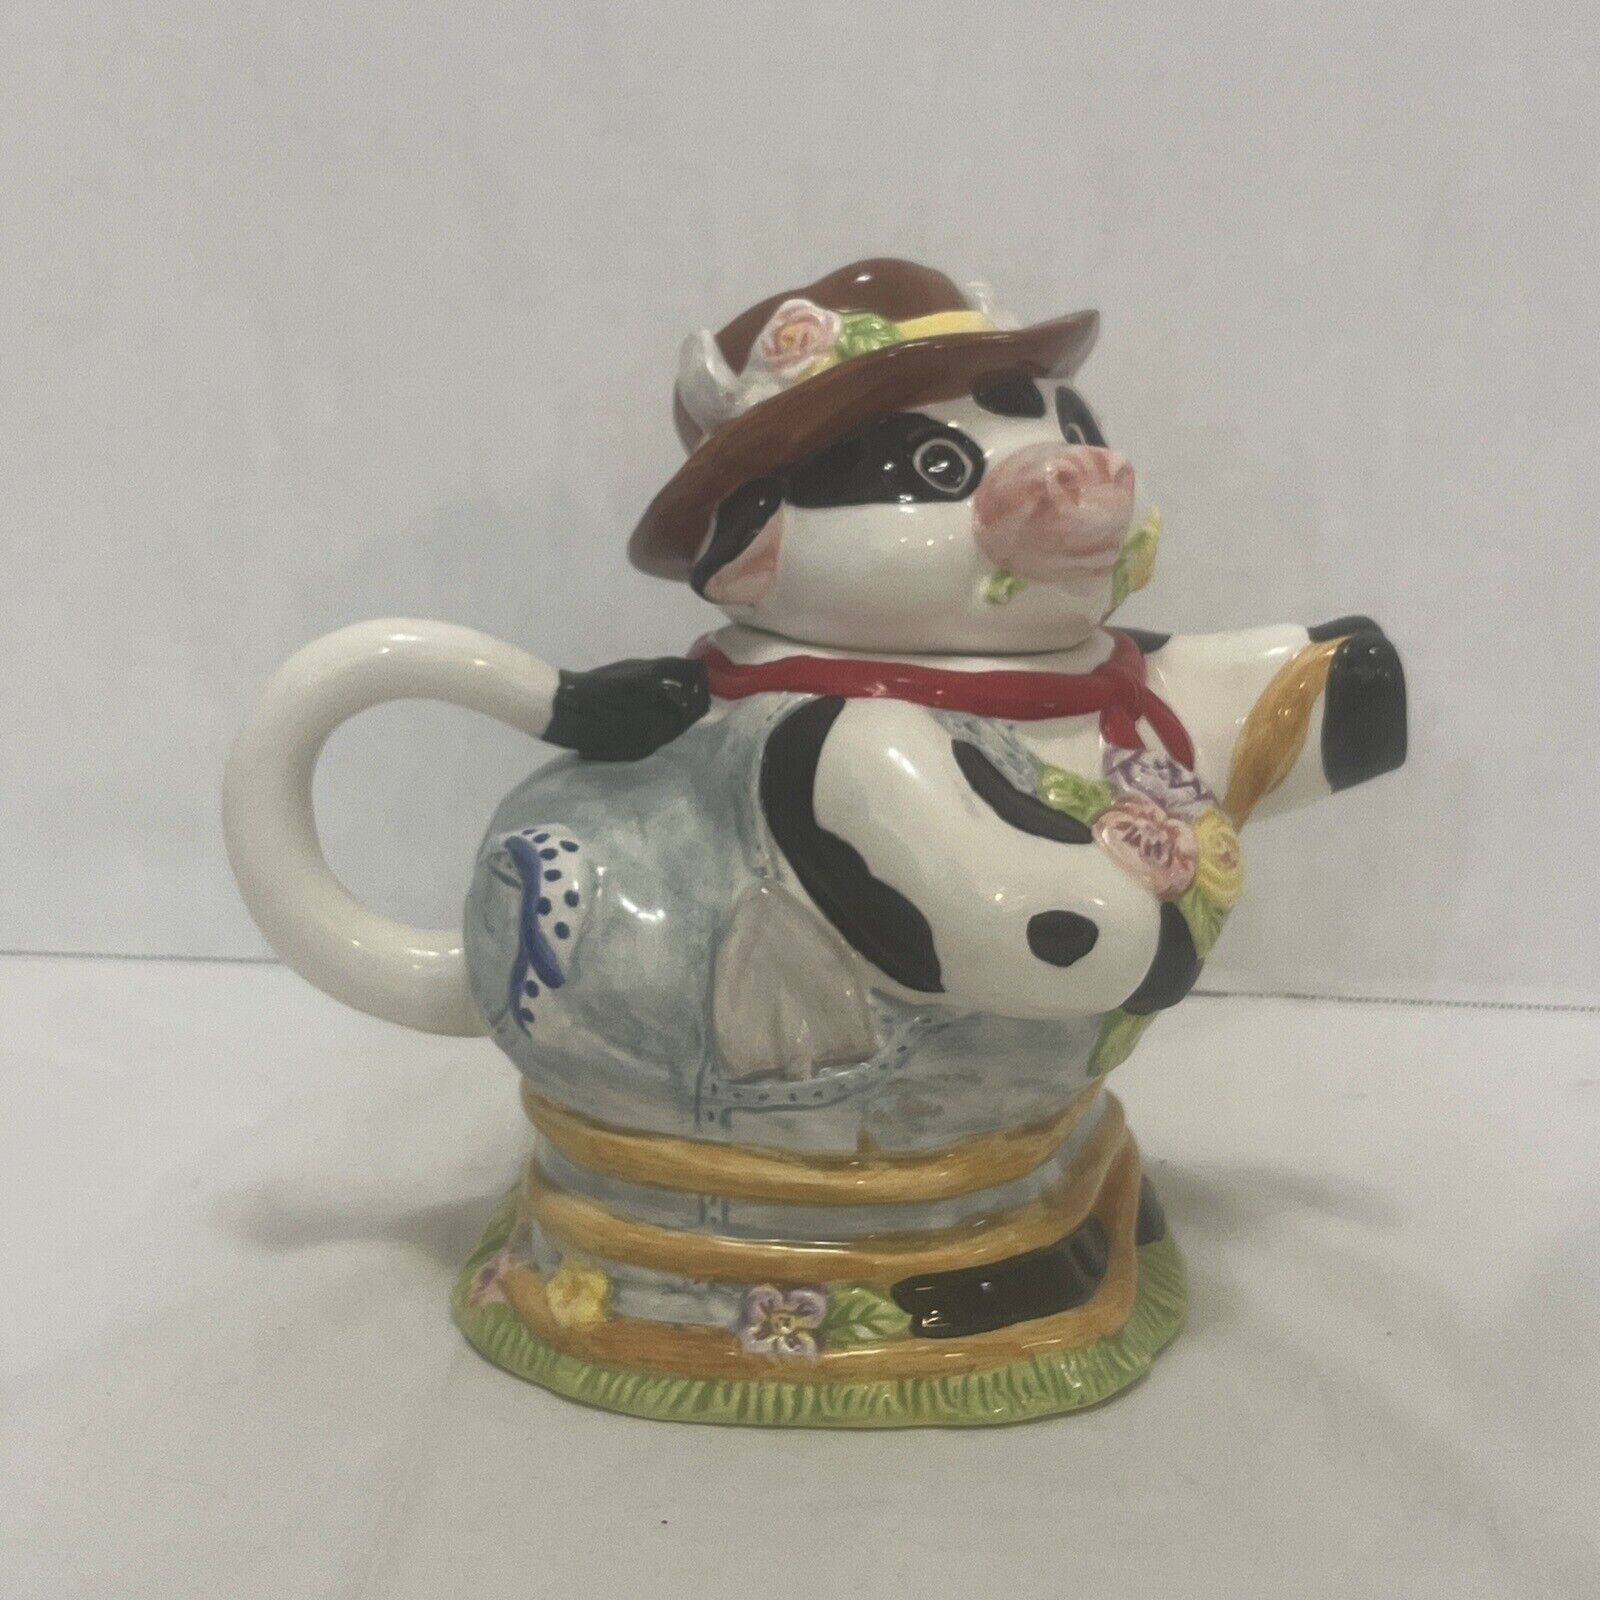 Vintage 1995 Young’s China Animated Cow Tea Pot 